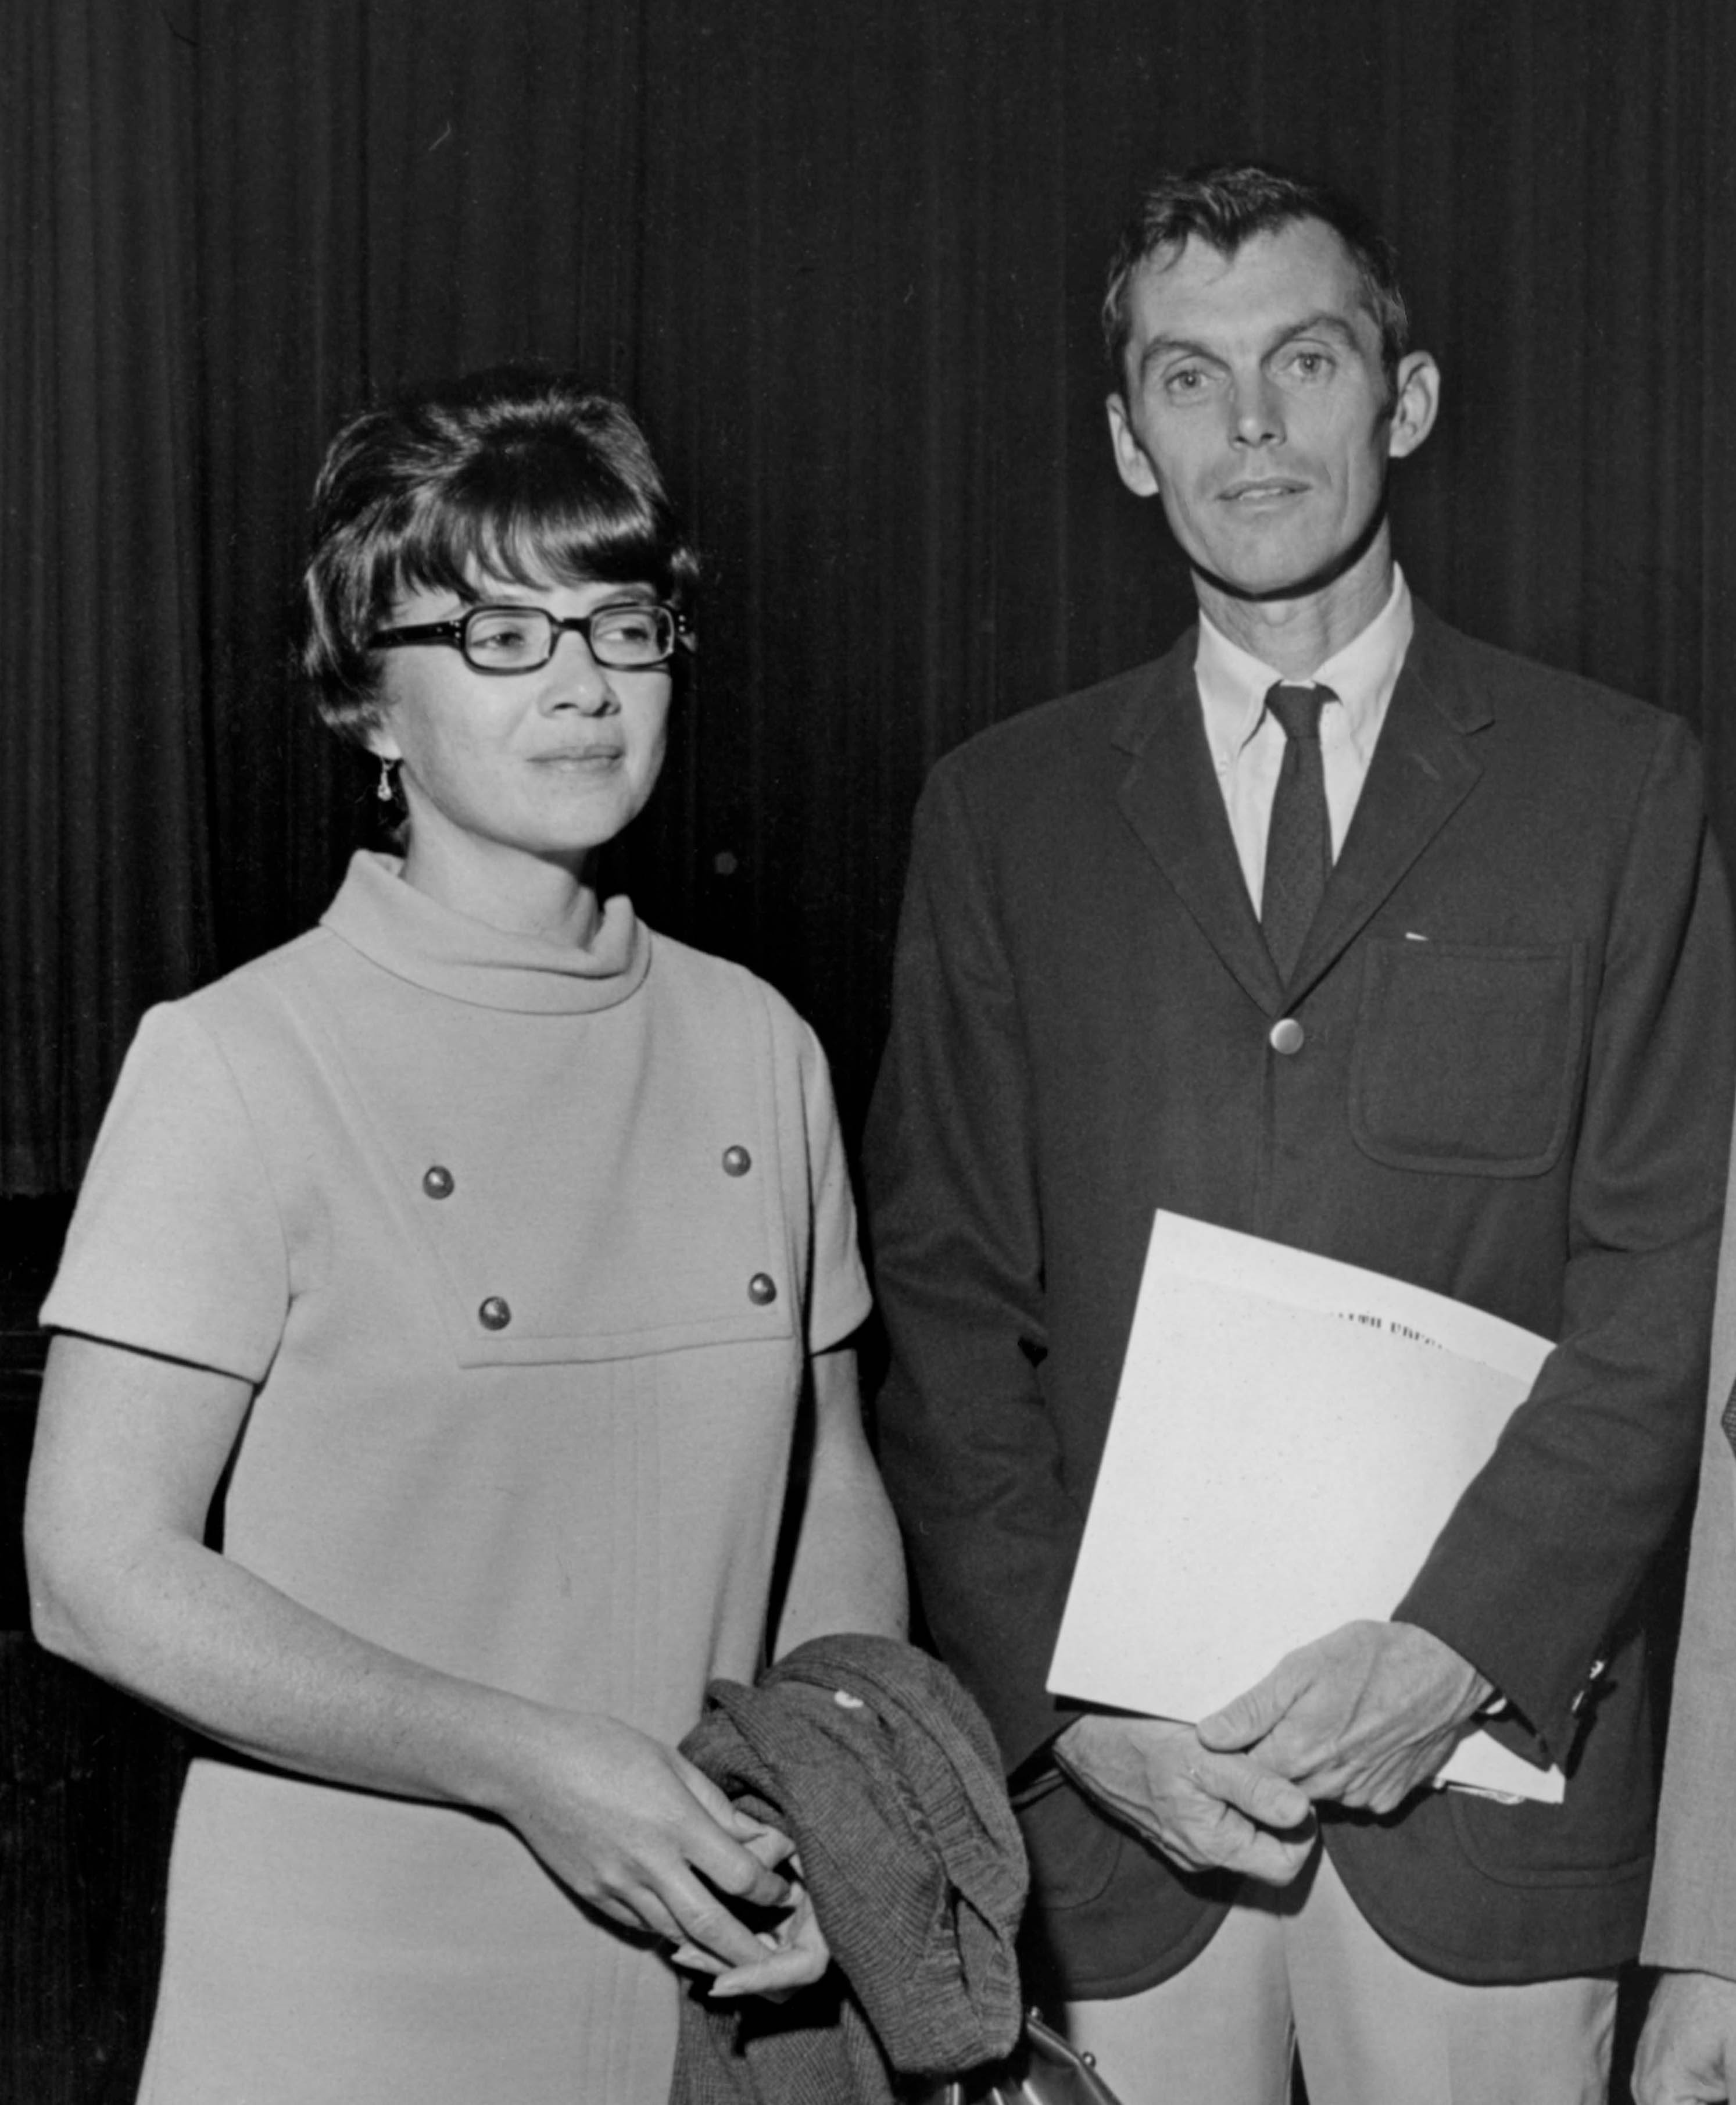 Potter and his wife at awards ceremony